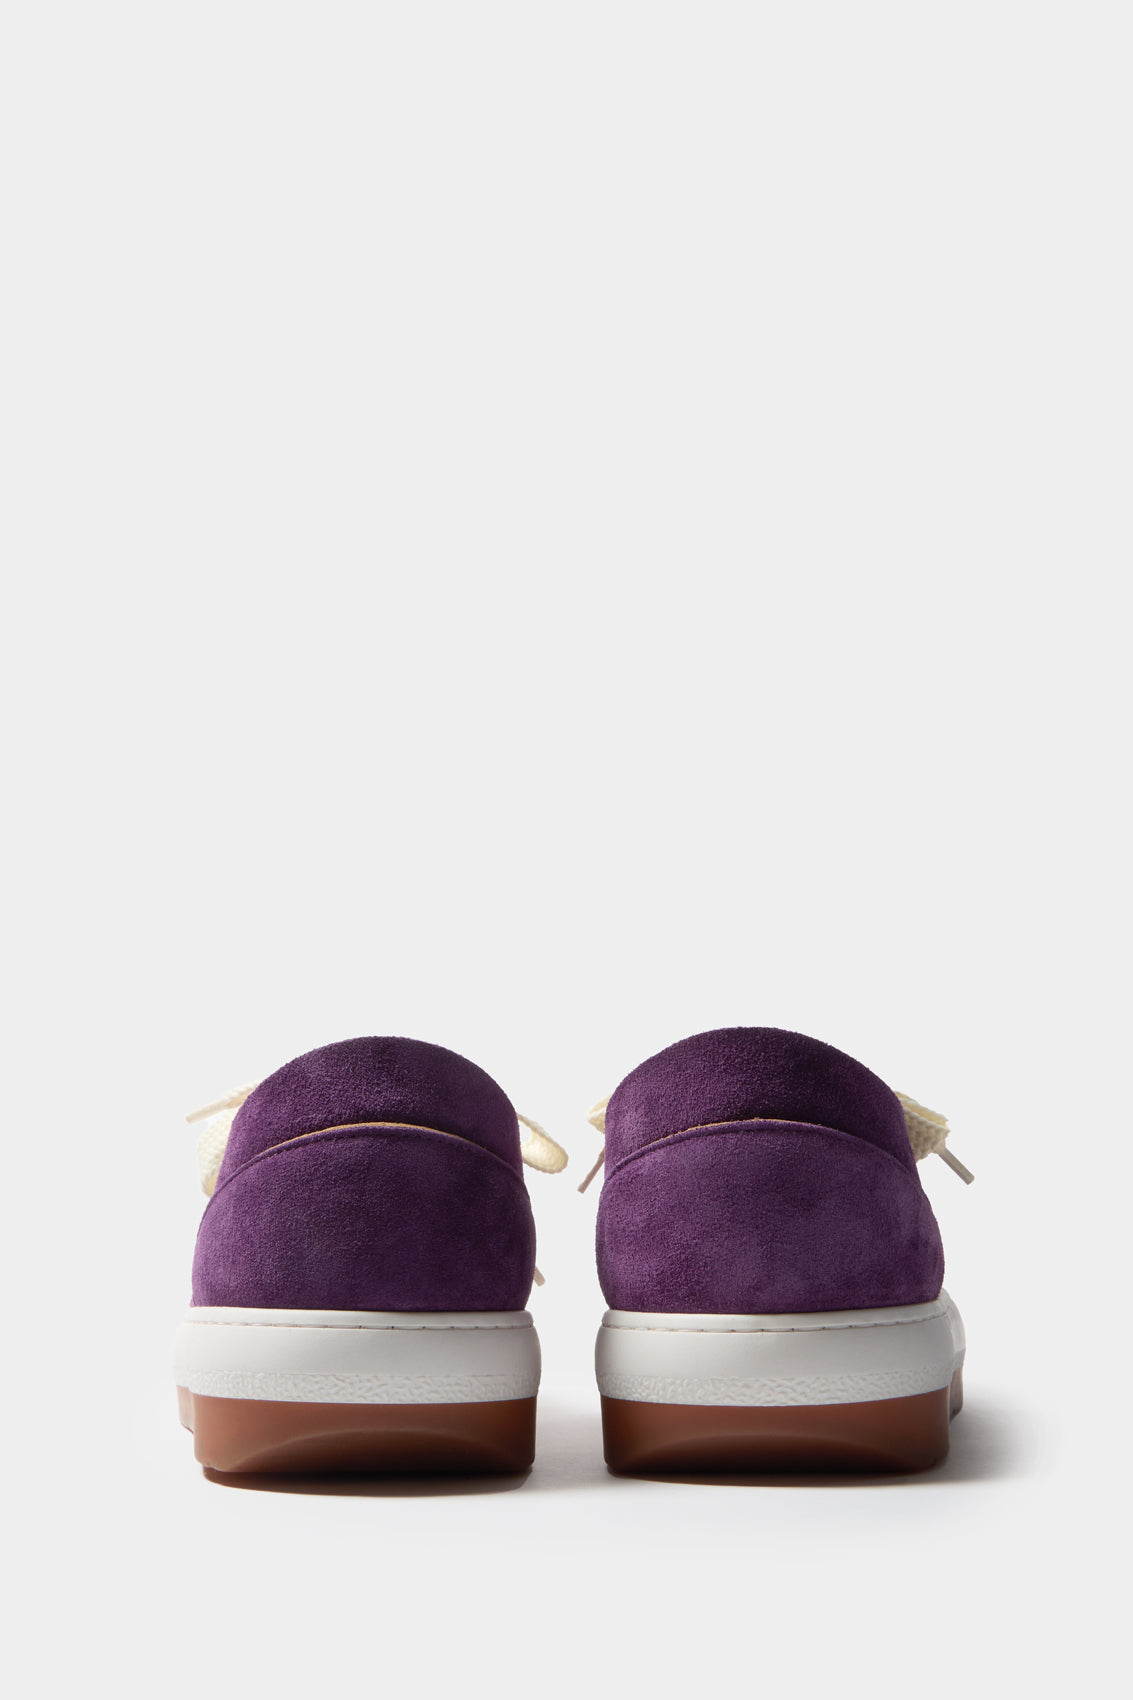 DREAMY SHOES / suede / aubergine